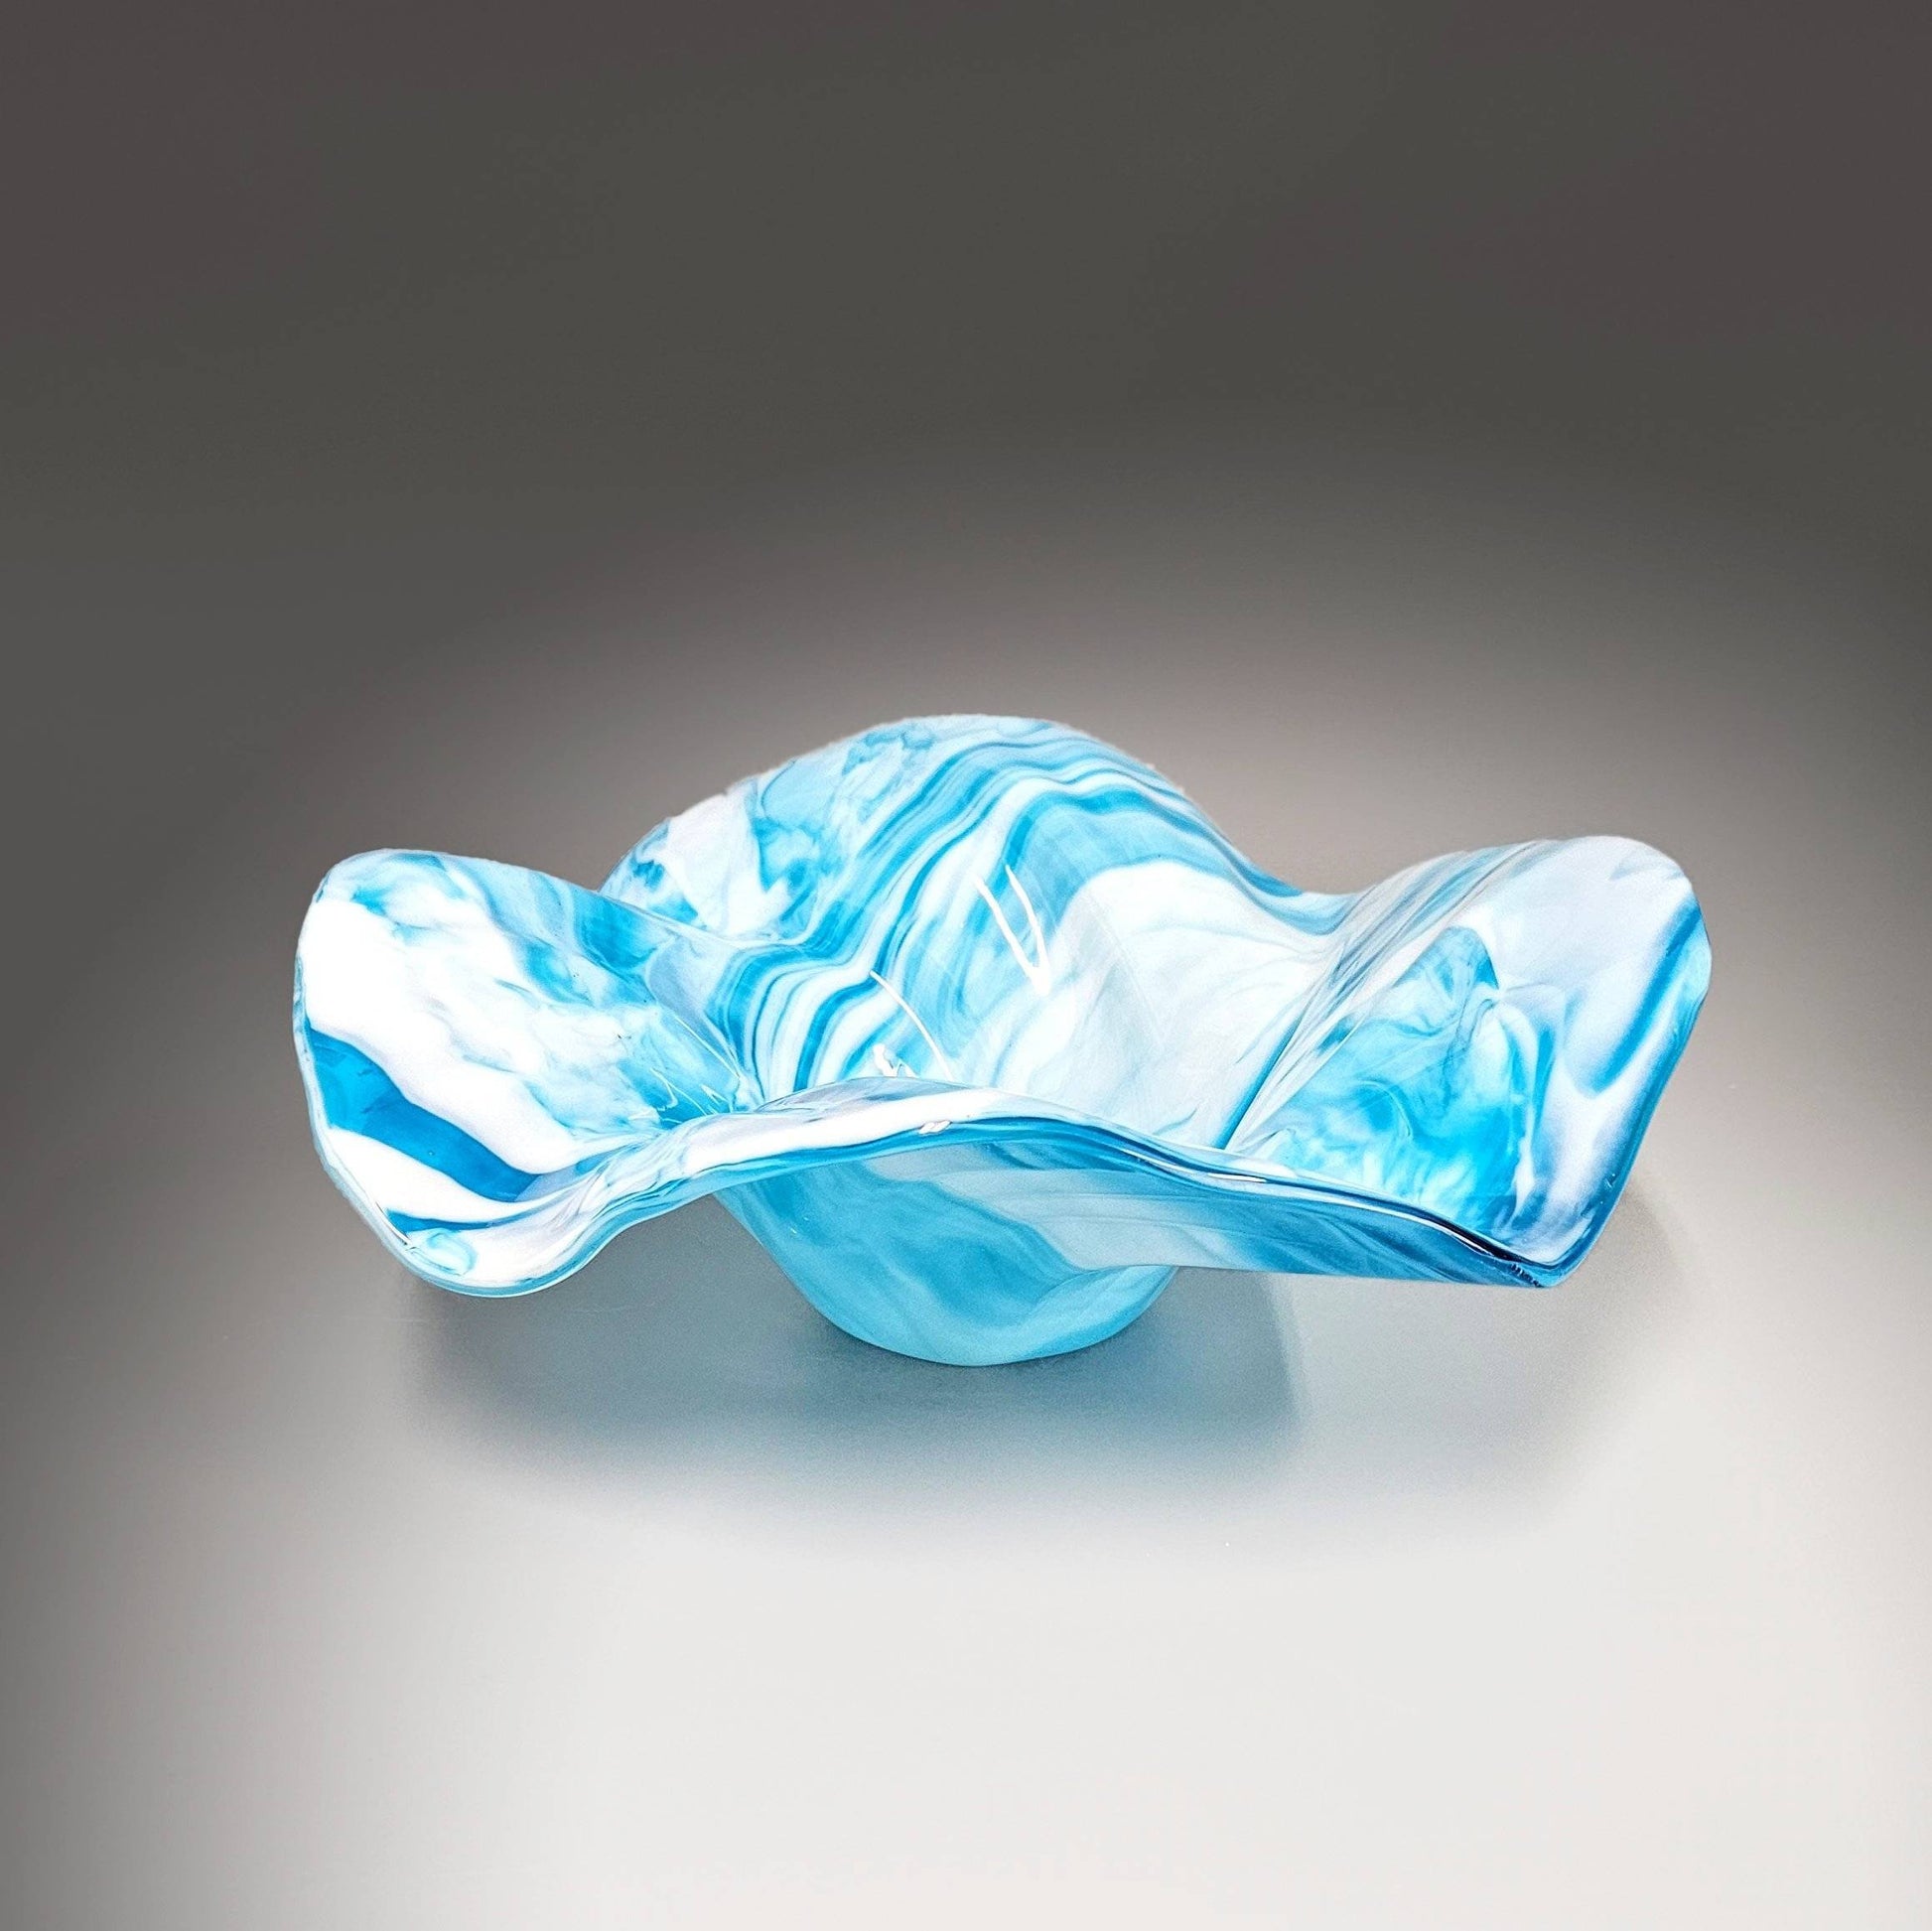 Glass Art Wave Bowl in Turquoise Blue and White | Beach Décor Gifts